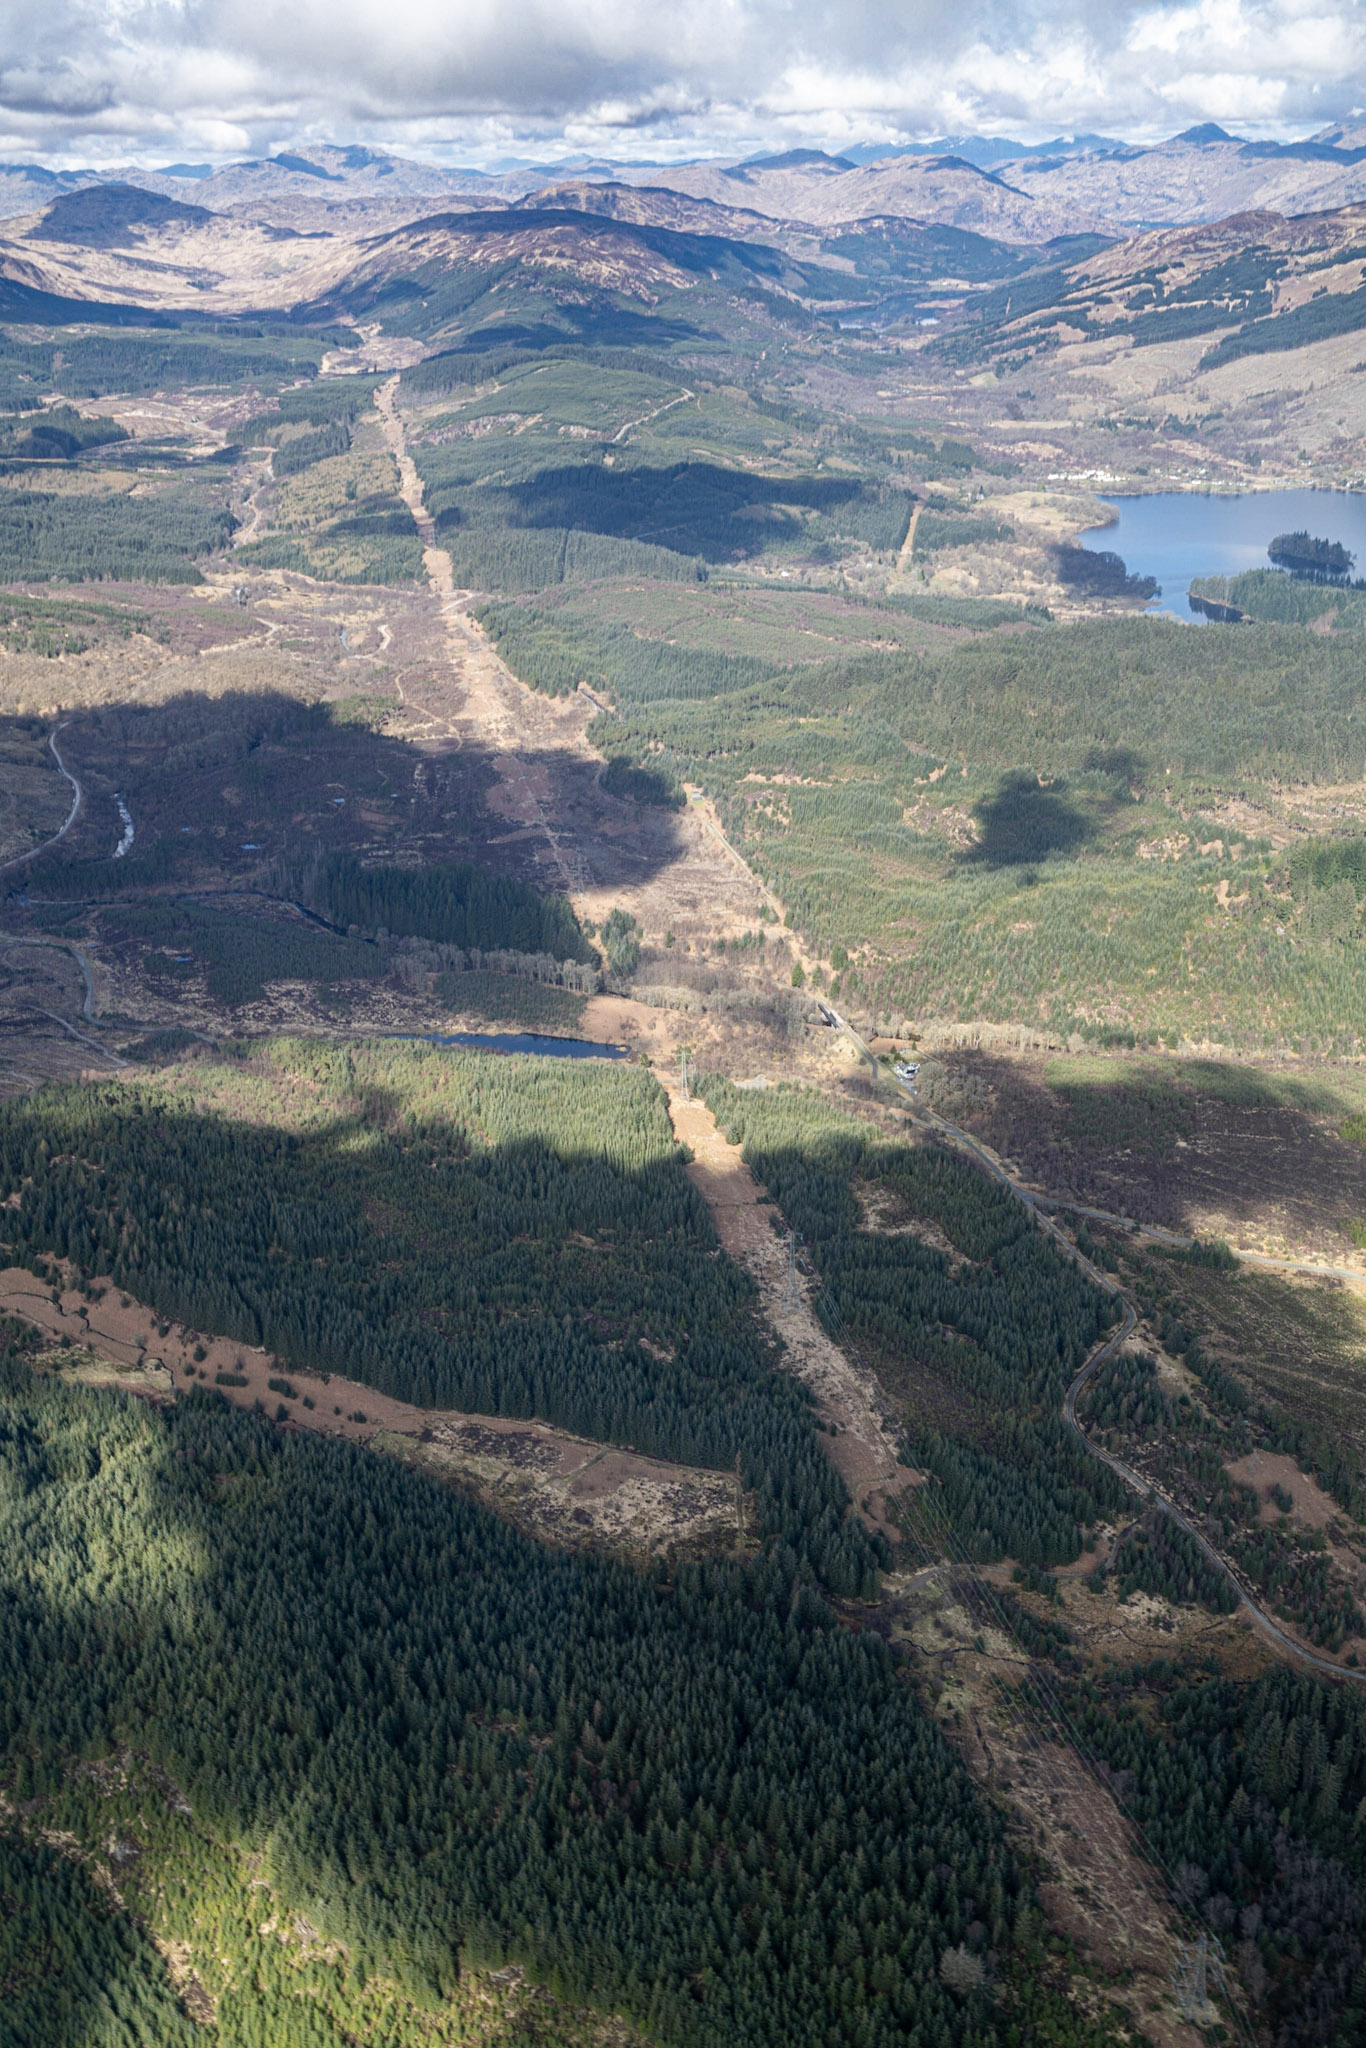 View of pipeline route from the air